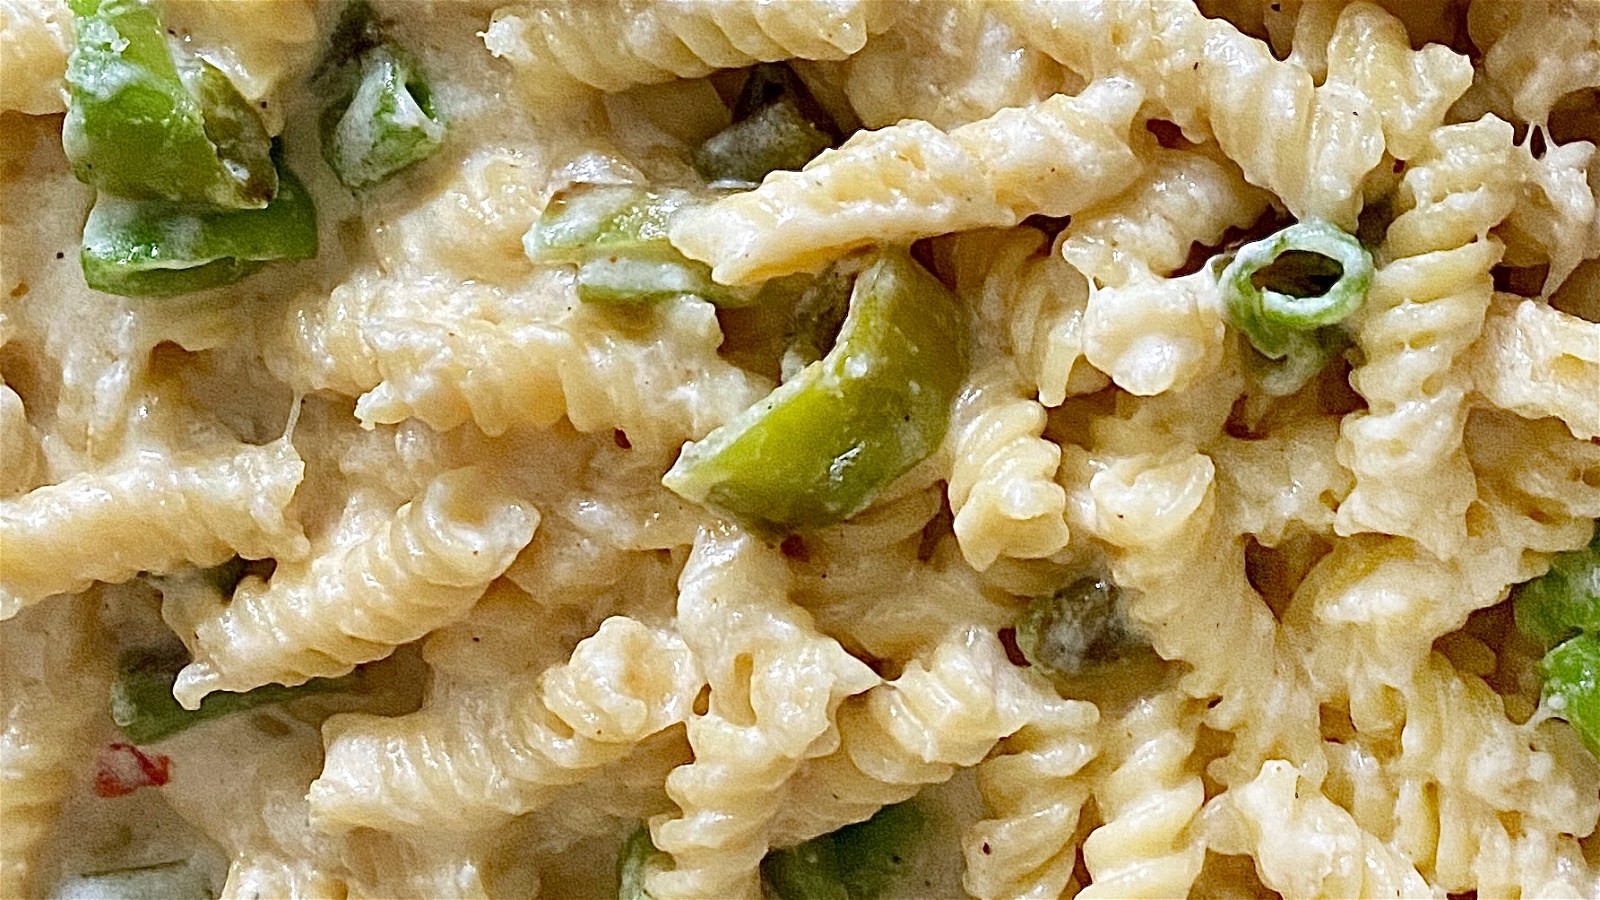 Image of Unexpected Cheddar Hatch Chile Mac & Cheese